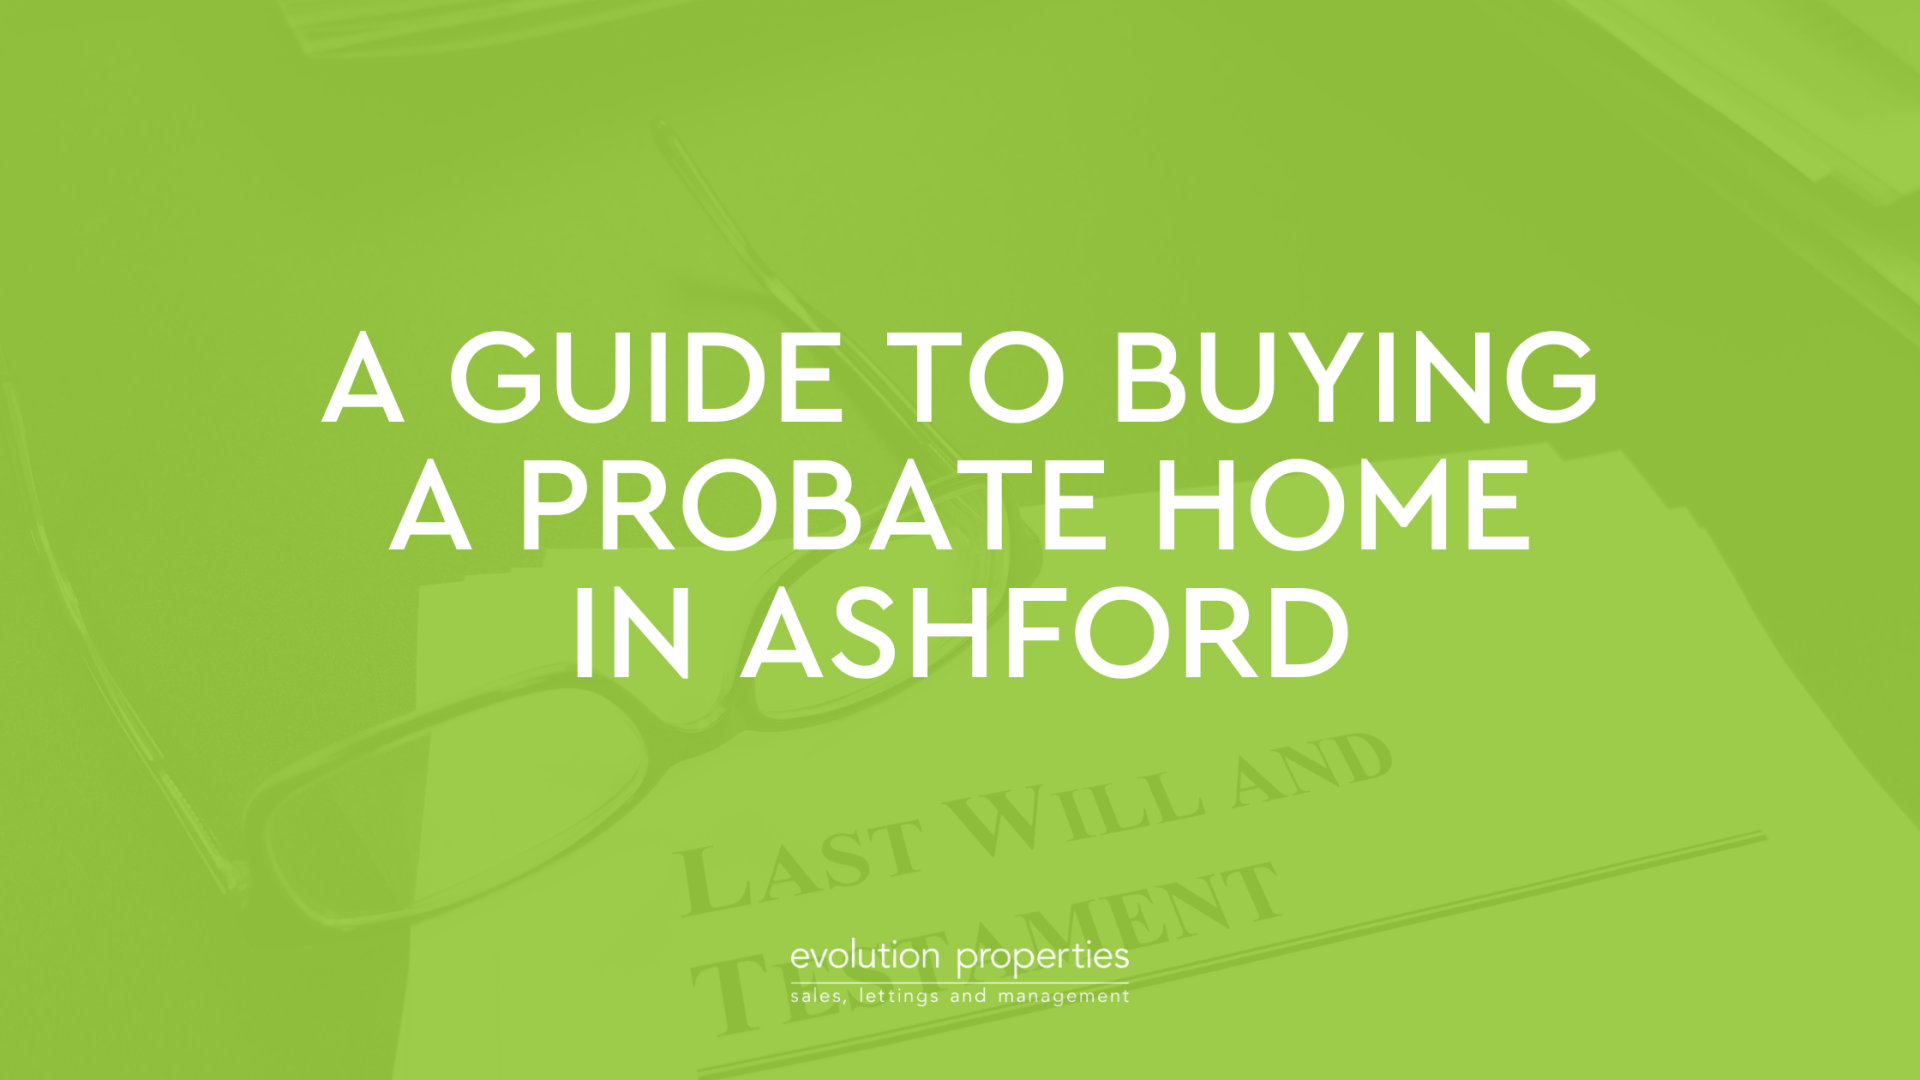 A Guide to Buying a Probate Home in Ashford